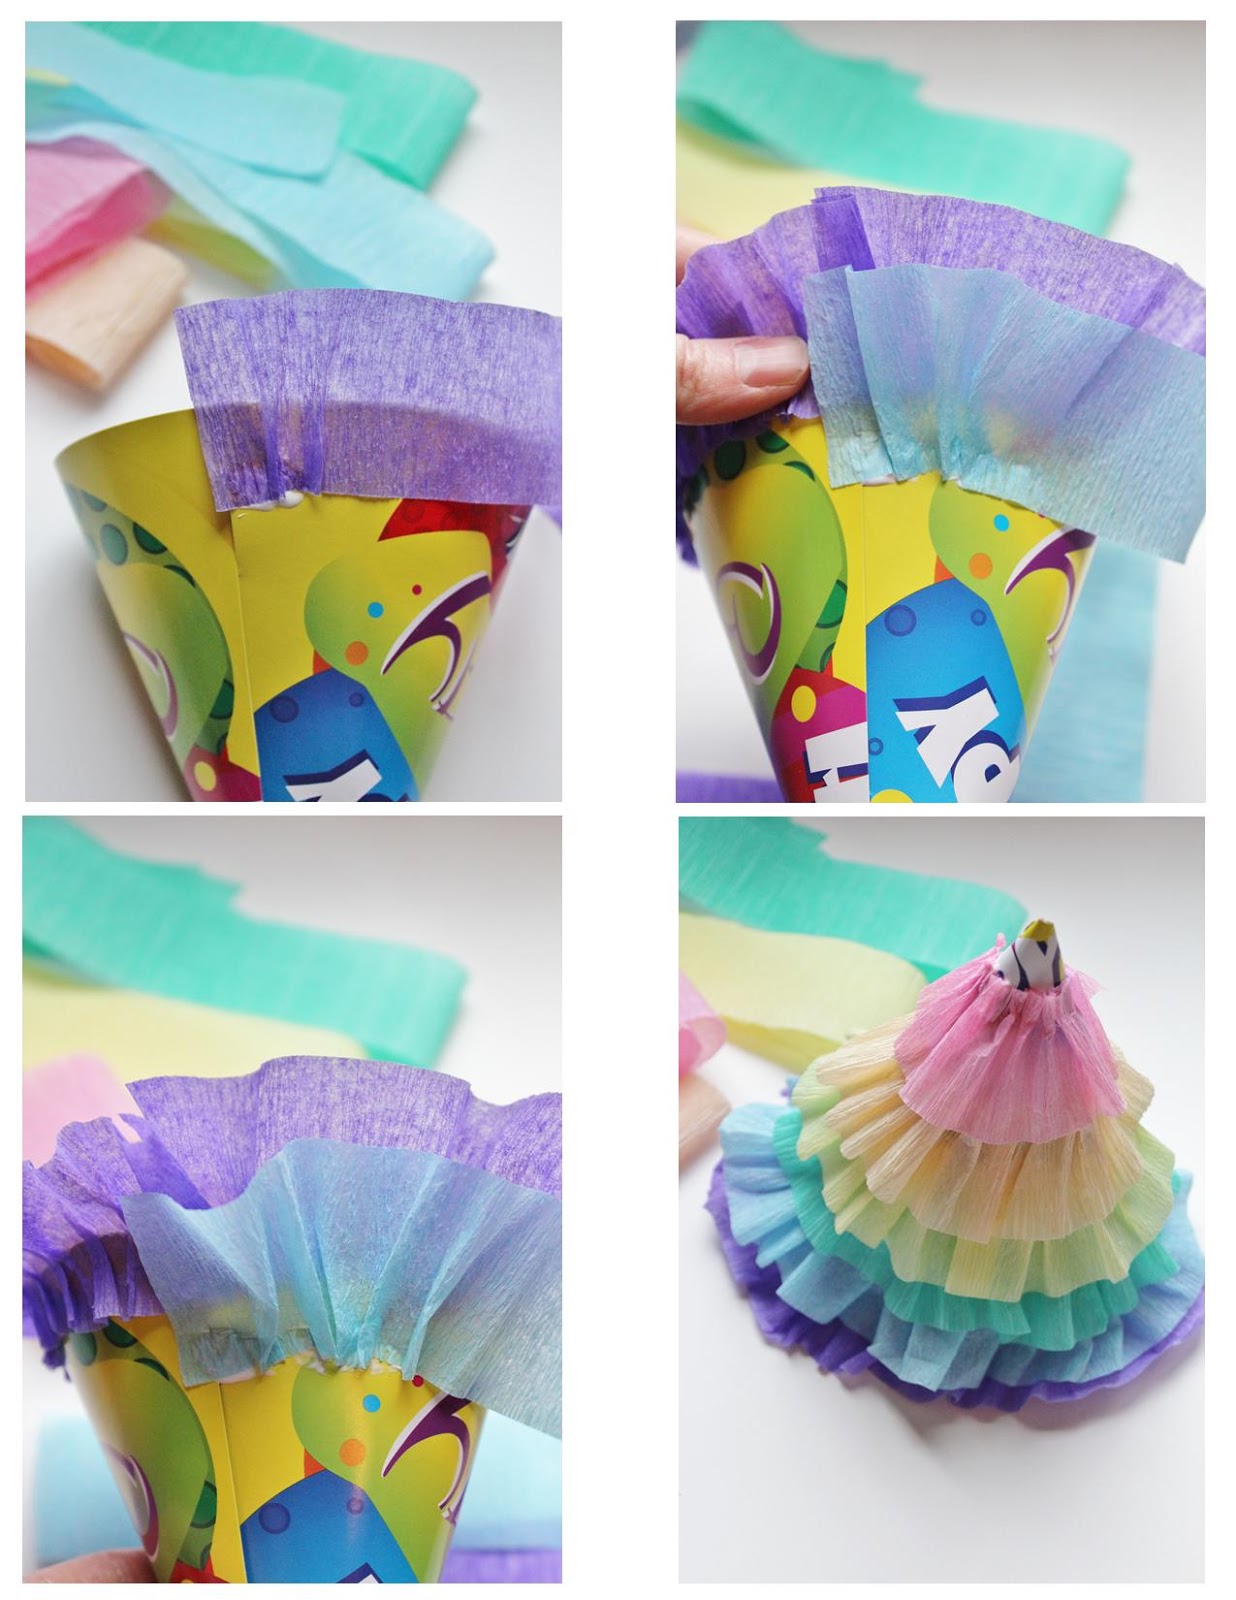 DIY rainbow ruffle party hats for My Little Pony parties